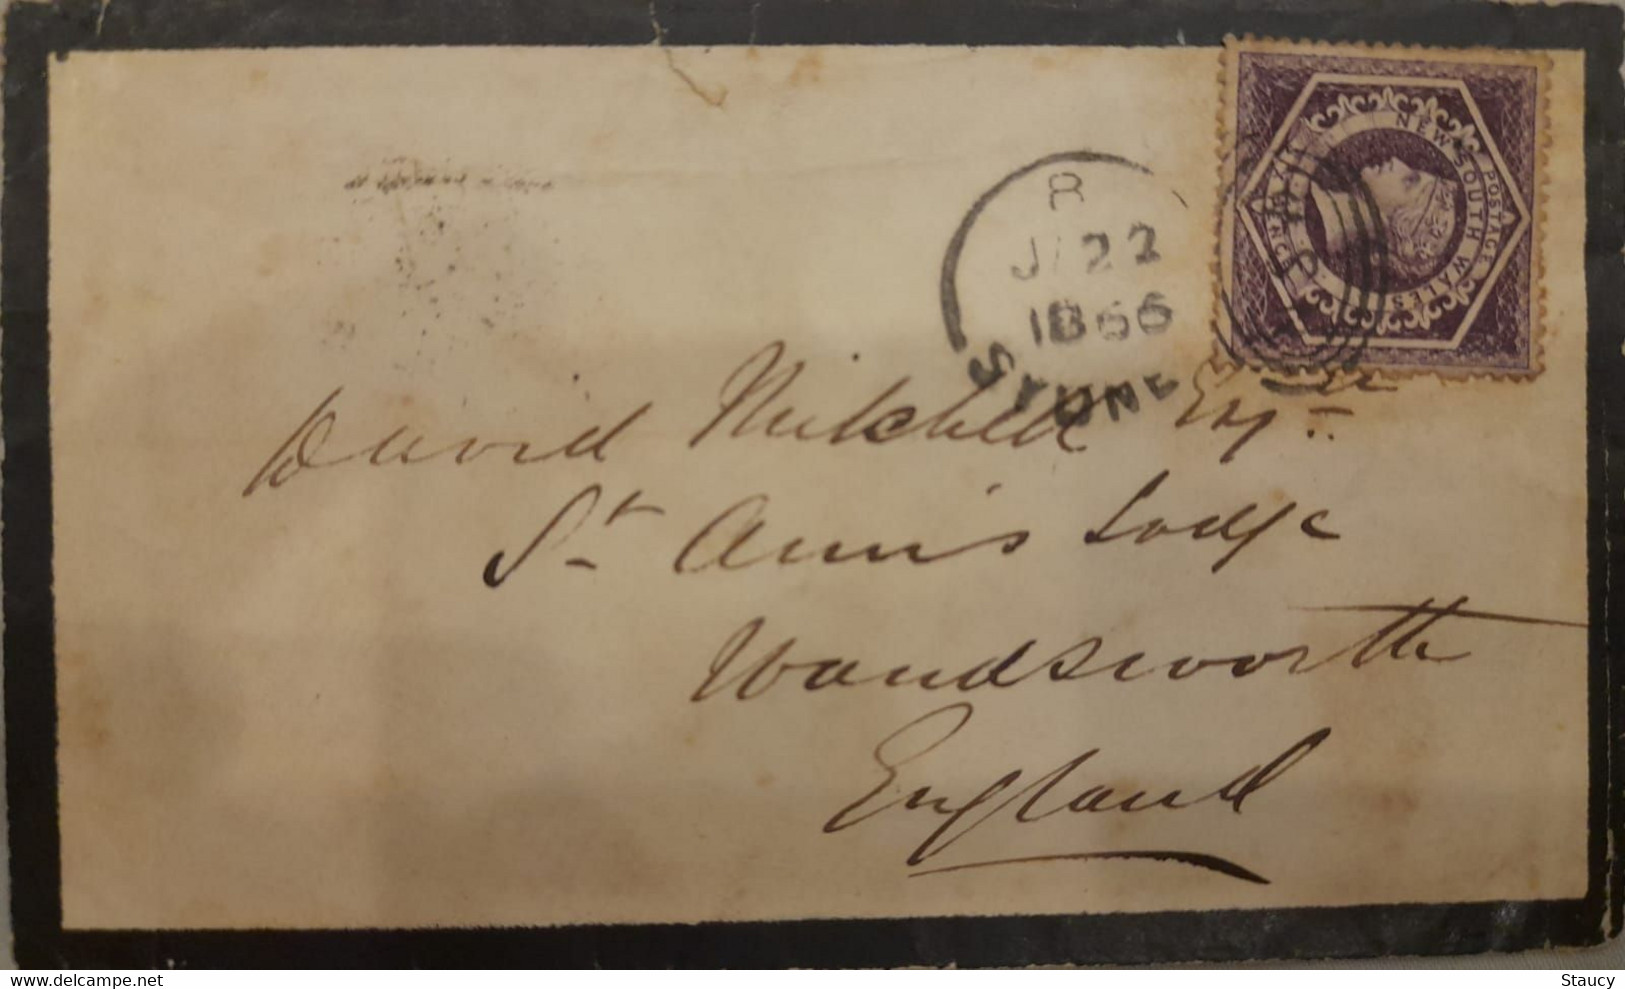 AUSTRALIA NEW SOUTH WALES 1866 NSW - GB 6d Diadem (Sg#166) Sydney To London NSW OVAL RING CANCELLATION - Covers & Documents